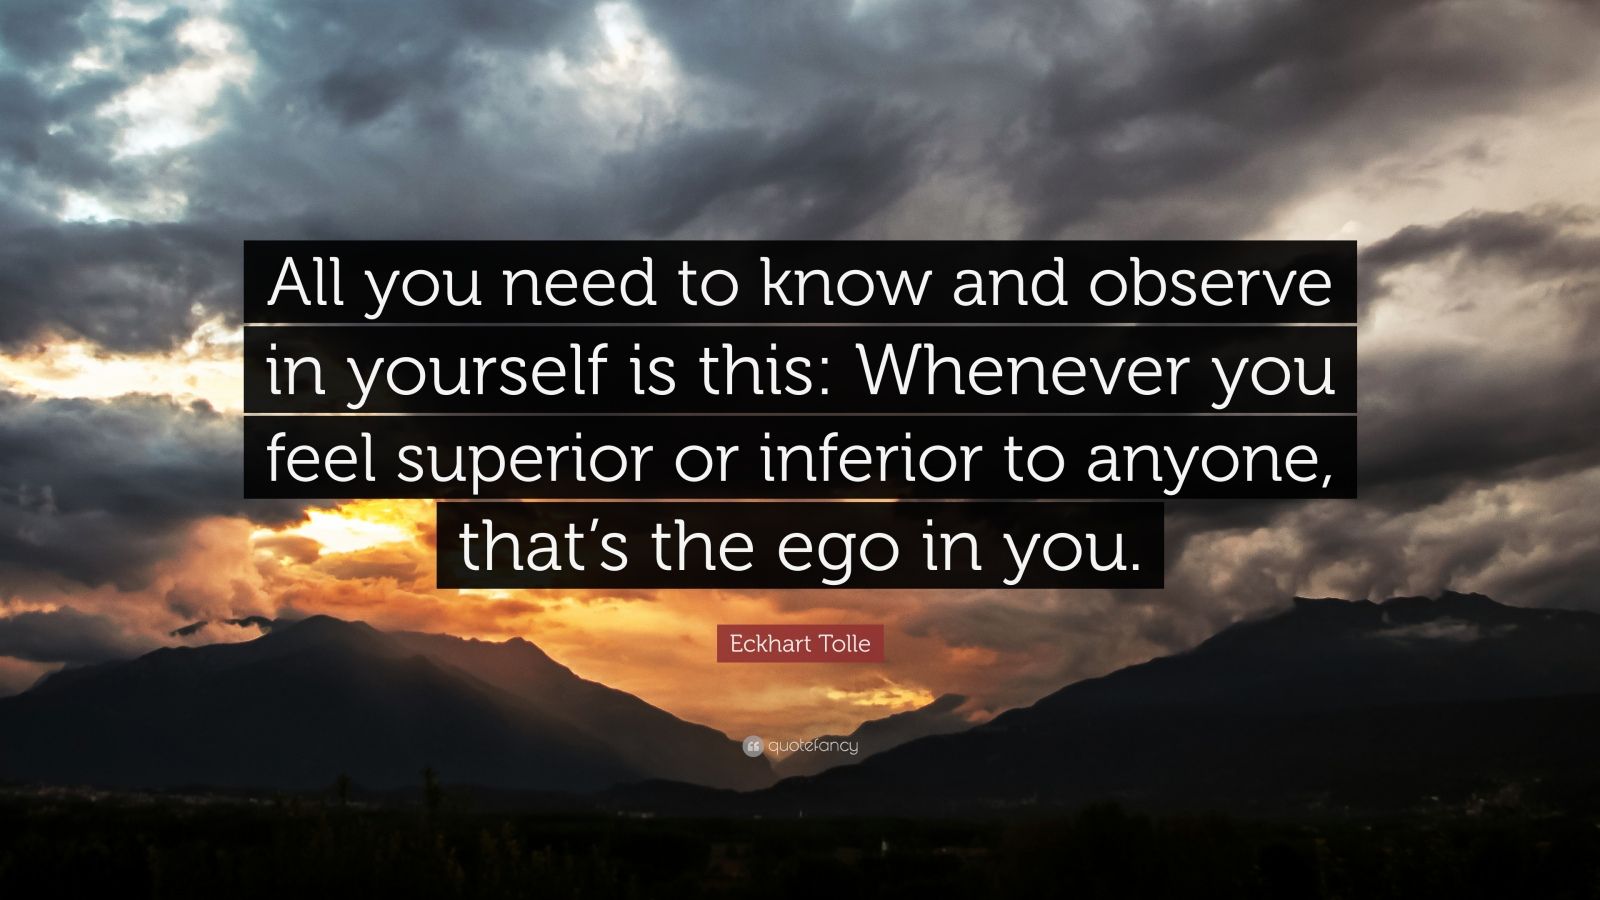 Top 40 Ego Quotes | 2021 Edition | Free Images - QuoteFancy